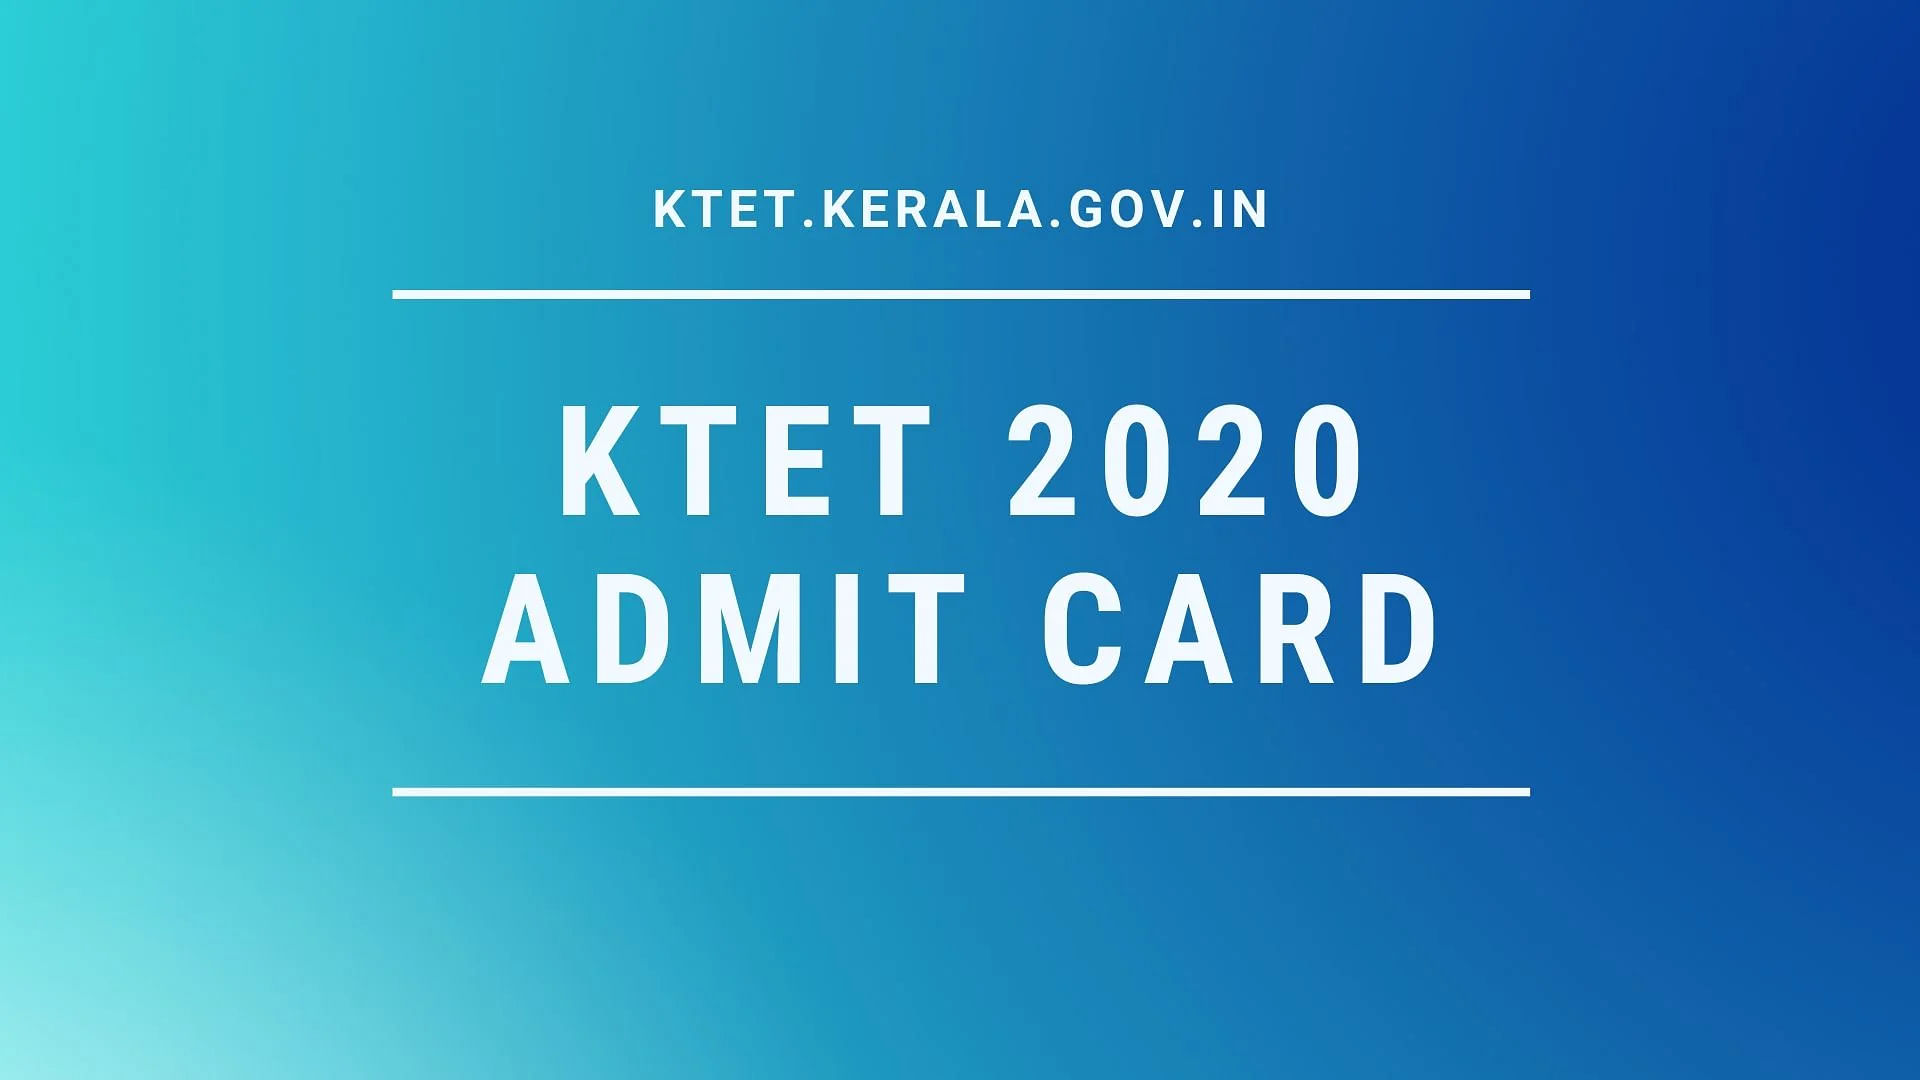 KTET 2020 amit card to be out soon.